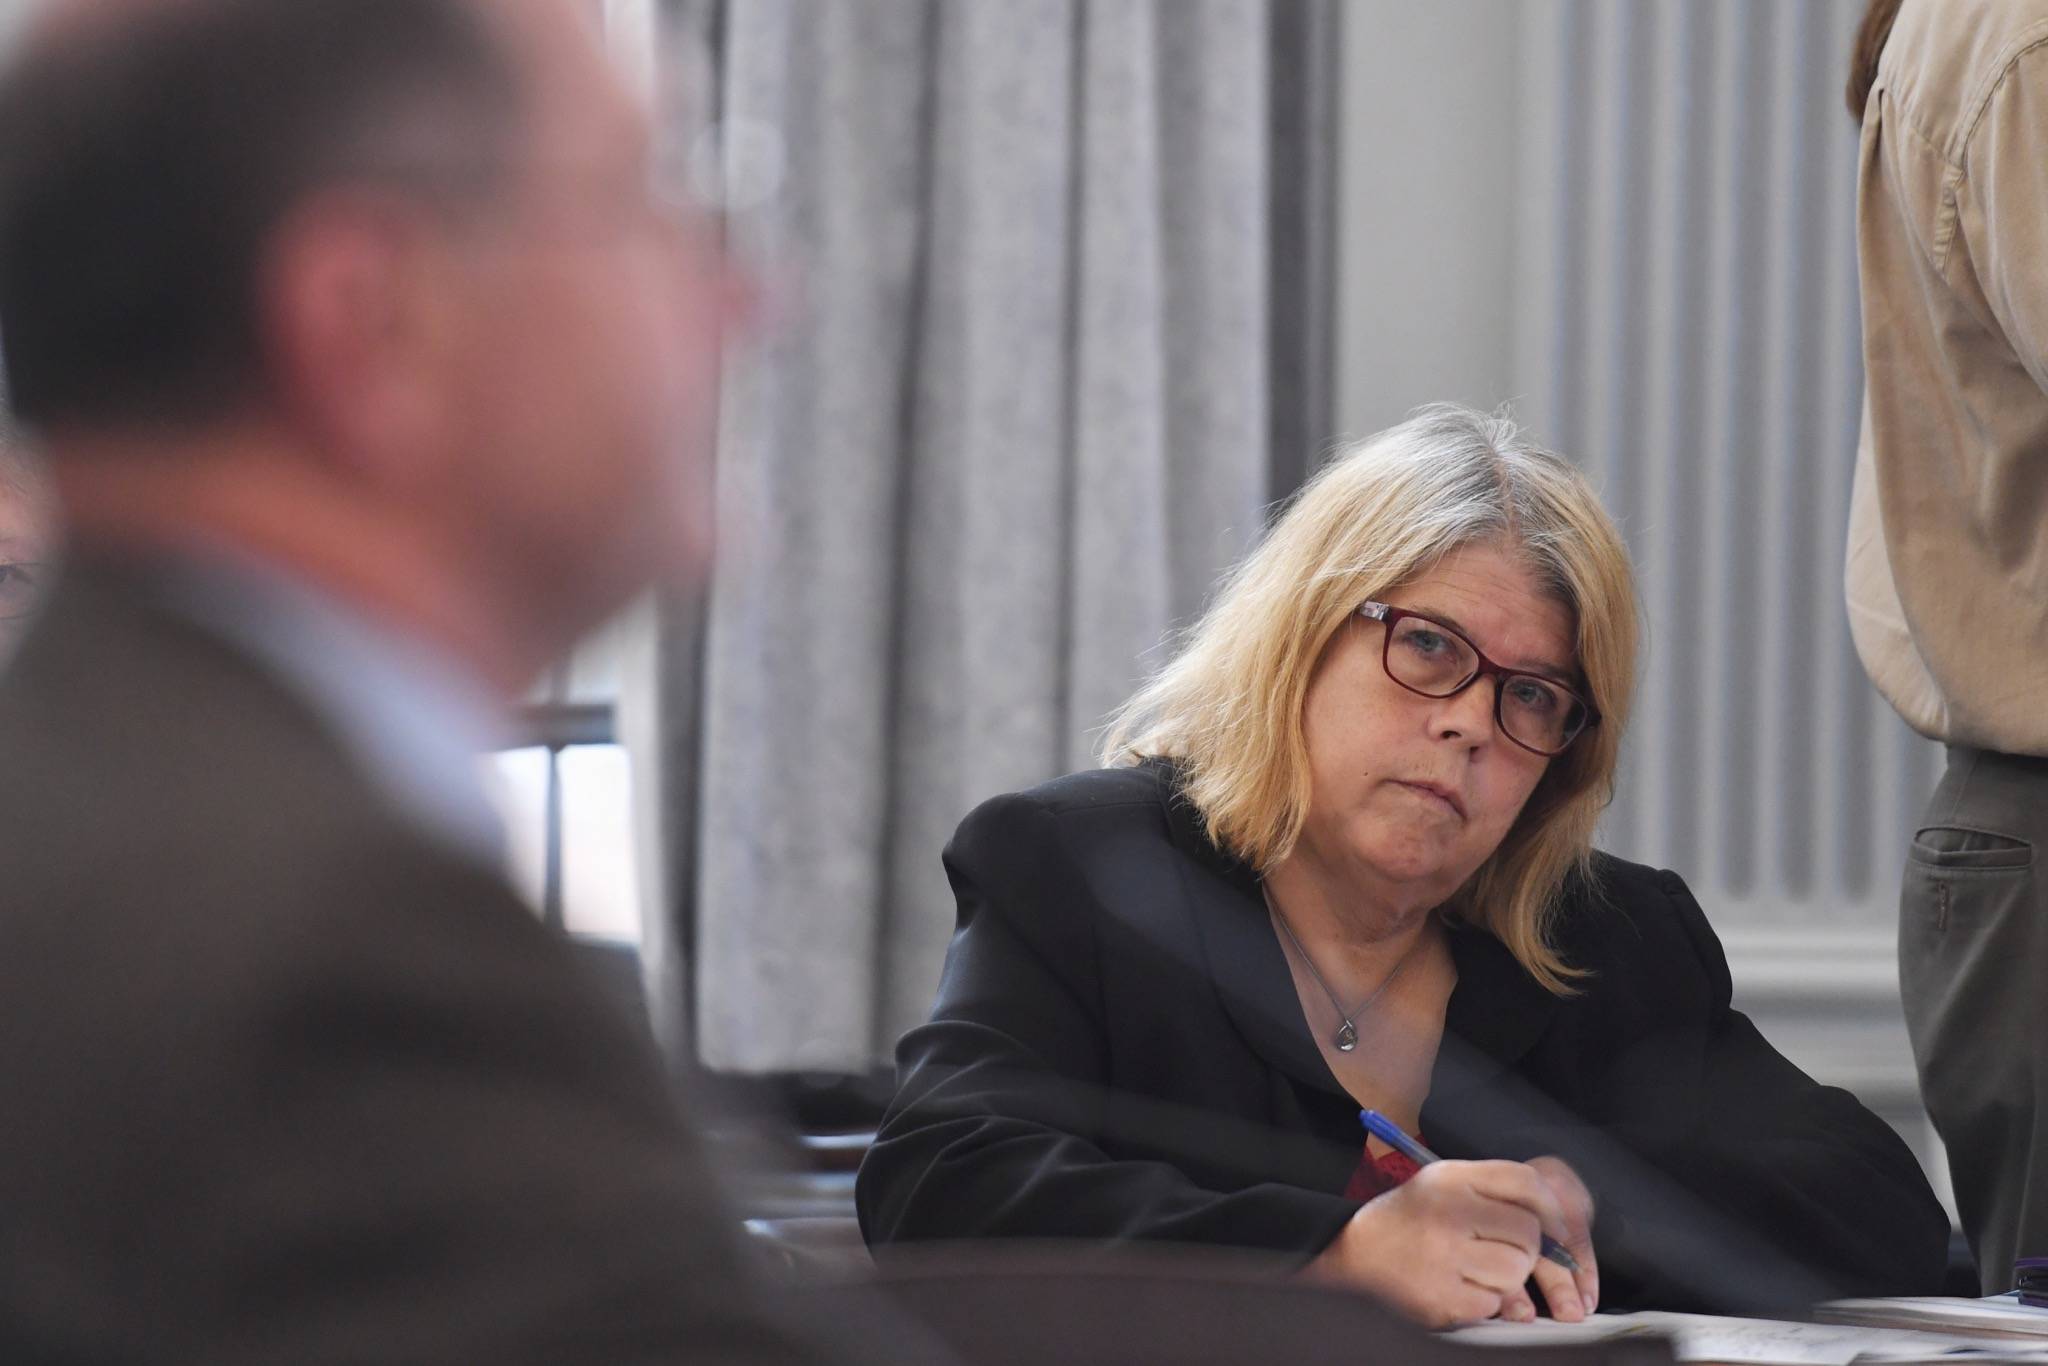 Rep. Tammie Wilson, R-North Pole, listens to David Teal, director of Legislative Finance, as he explains budget shortfalls to the Senate Finance Committee at the Capitol on Friday, July 19, 2019. (Michael Penn | Juneau Empire)